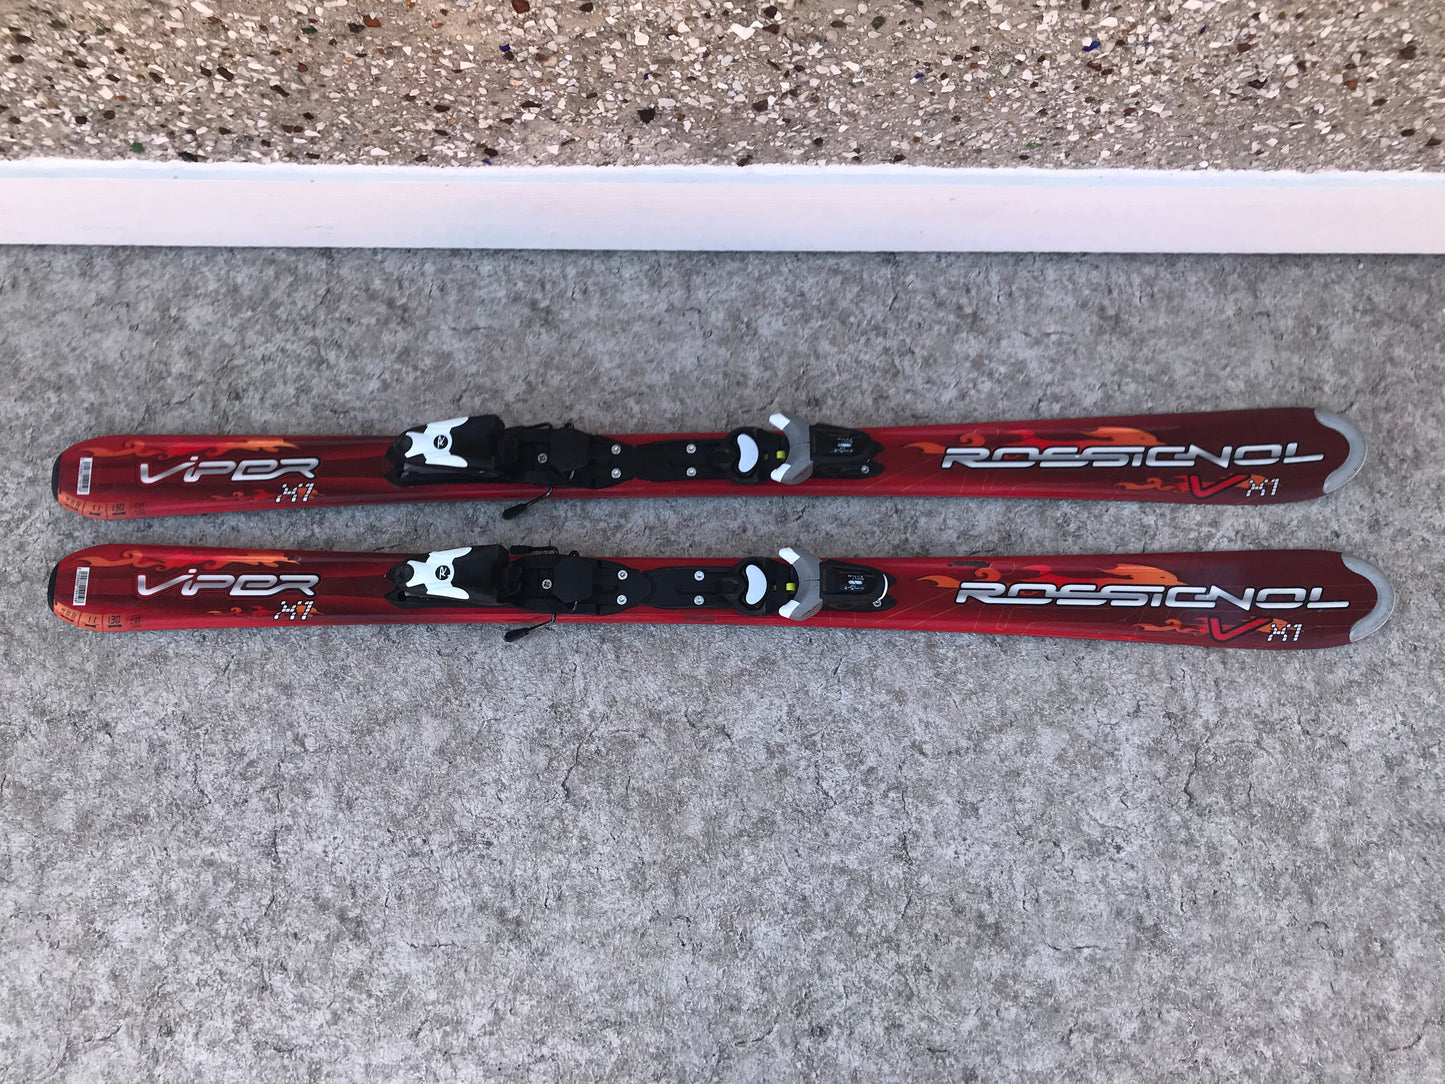 Ski 130 Rossignol Viper Red Parabolic With Bindings